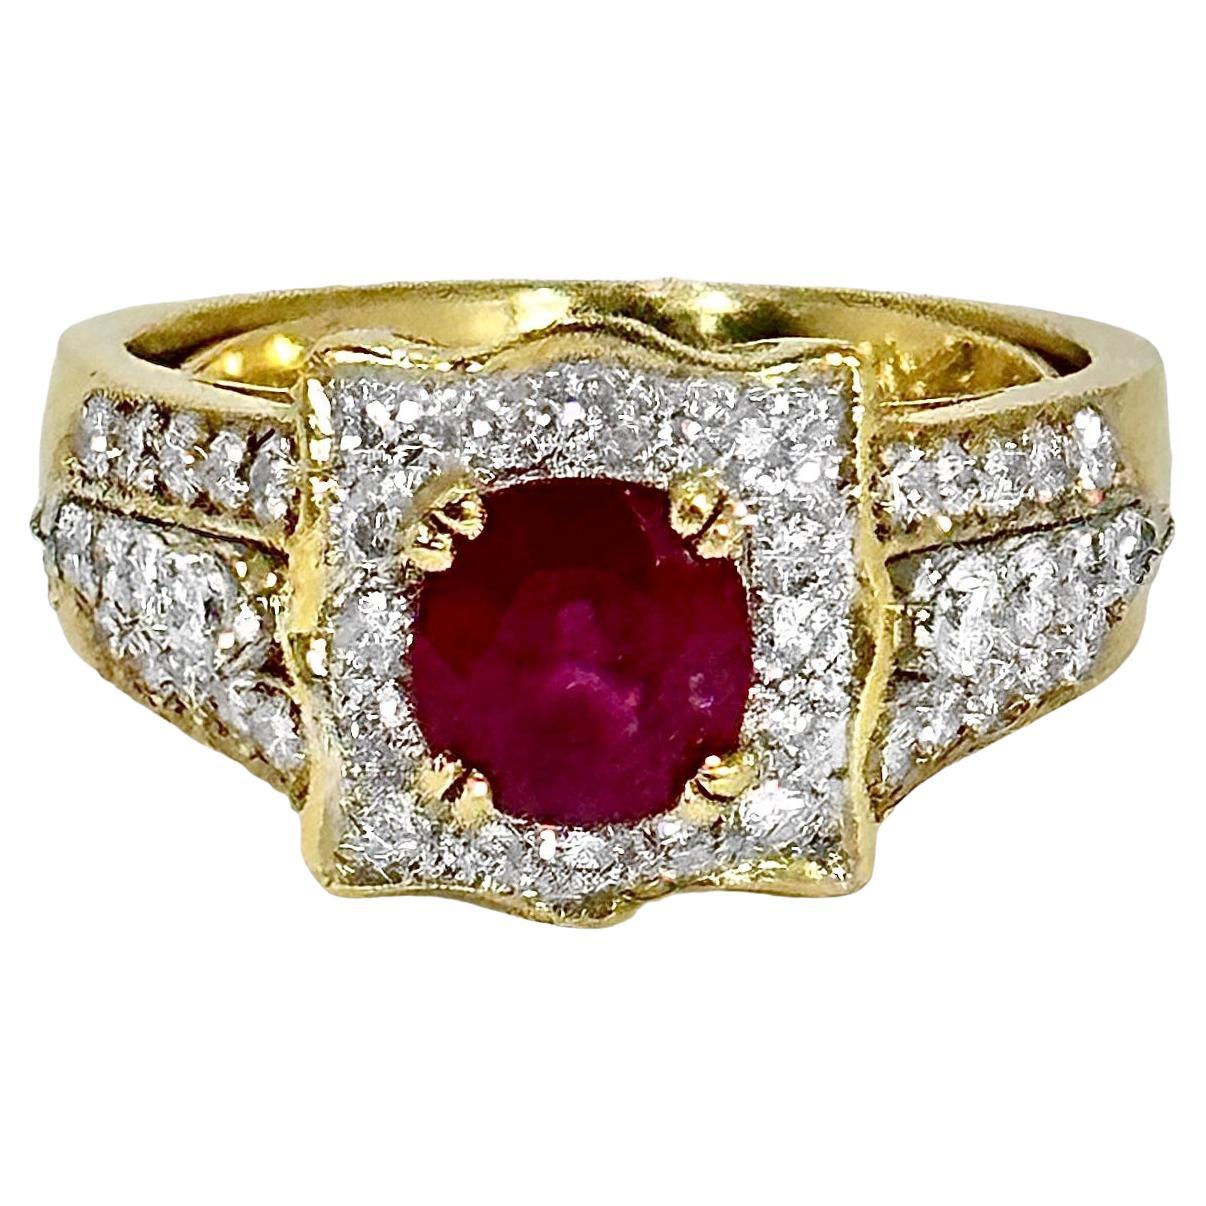 This wonderful Late-20th Century 18k yellow gold ladies cocktail ring is set with one center cushion shaped  brilliant cut natural ruby weighing exactly 1.15ct and with 46 brilliant cut diamonds having an exact total weight of 1.09ct. The diamonds